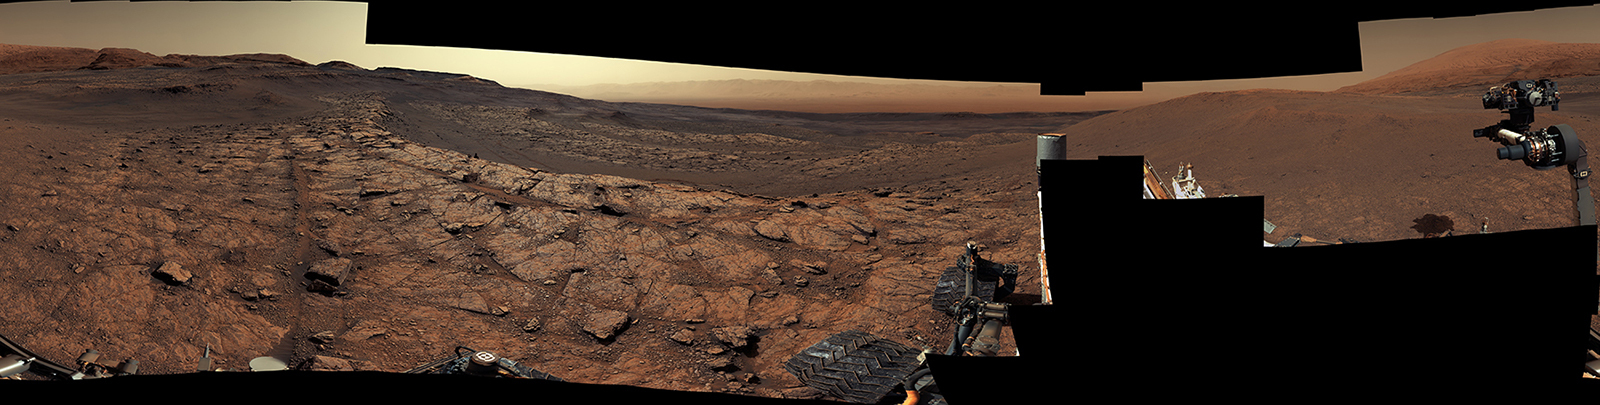 NASA's Curiosity Rover Reaches Its 3,000th Day on Mars